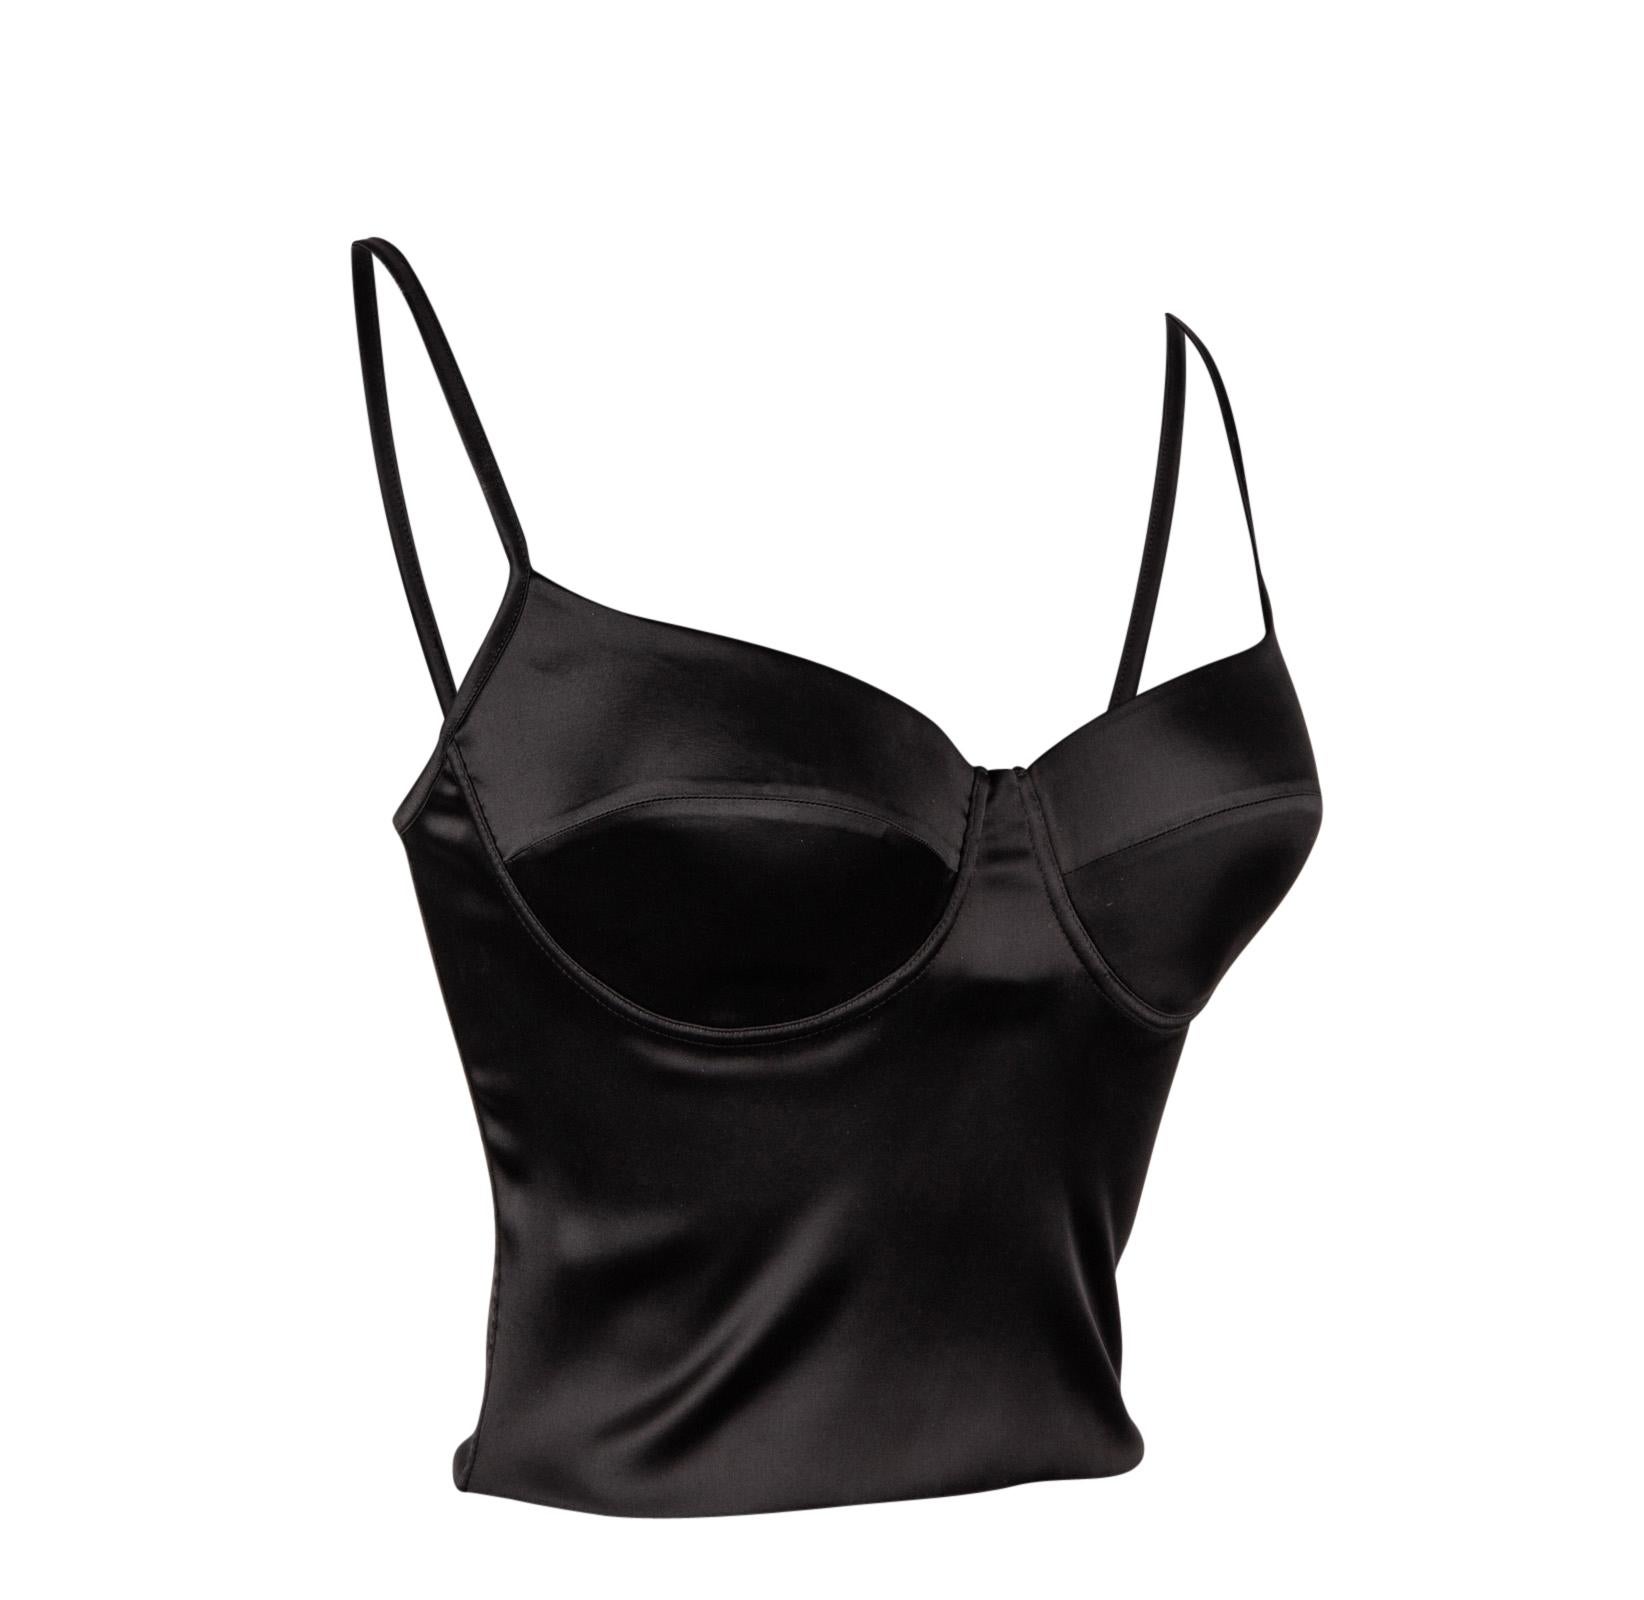 Guaranteed authentic Ritmo di La Perla solid black bustier.        
Defined cups with spaghetti straps.      
Flexible side boning provide support and form.
Back zip.    
Fabric is acetate, nylon and elastane.
Can be worn on its own or under a